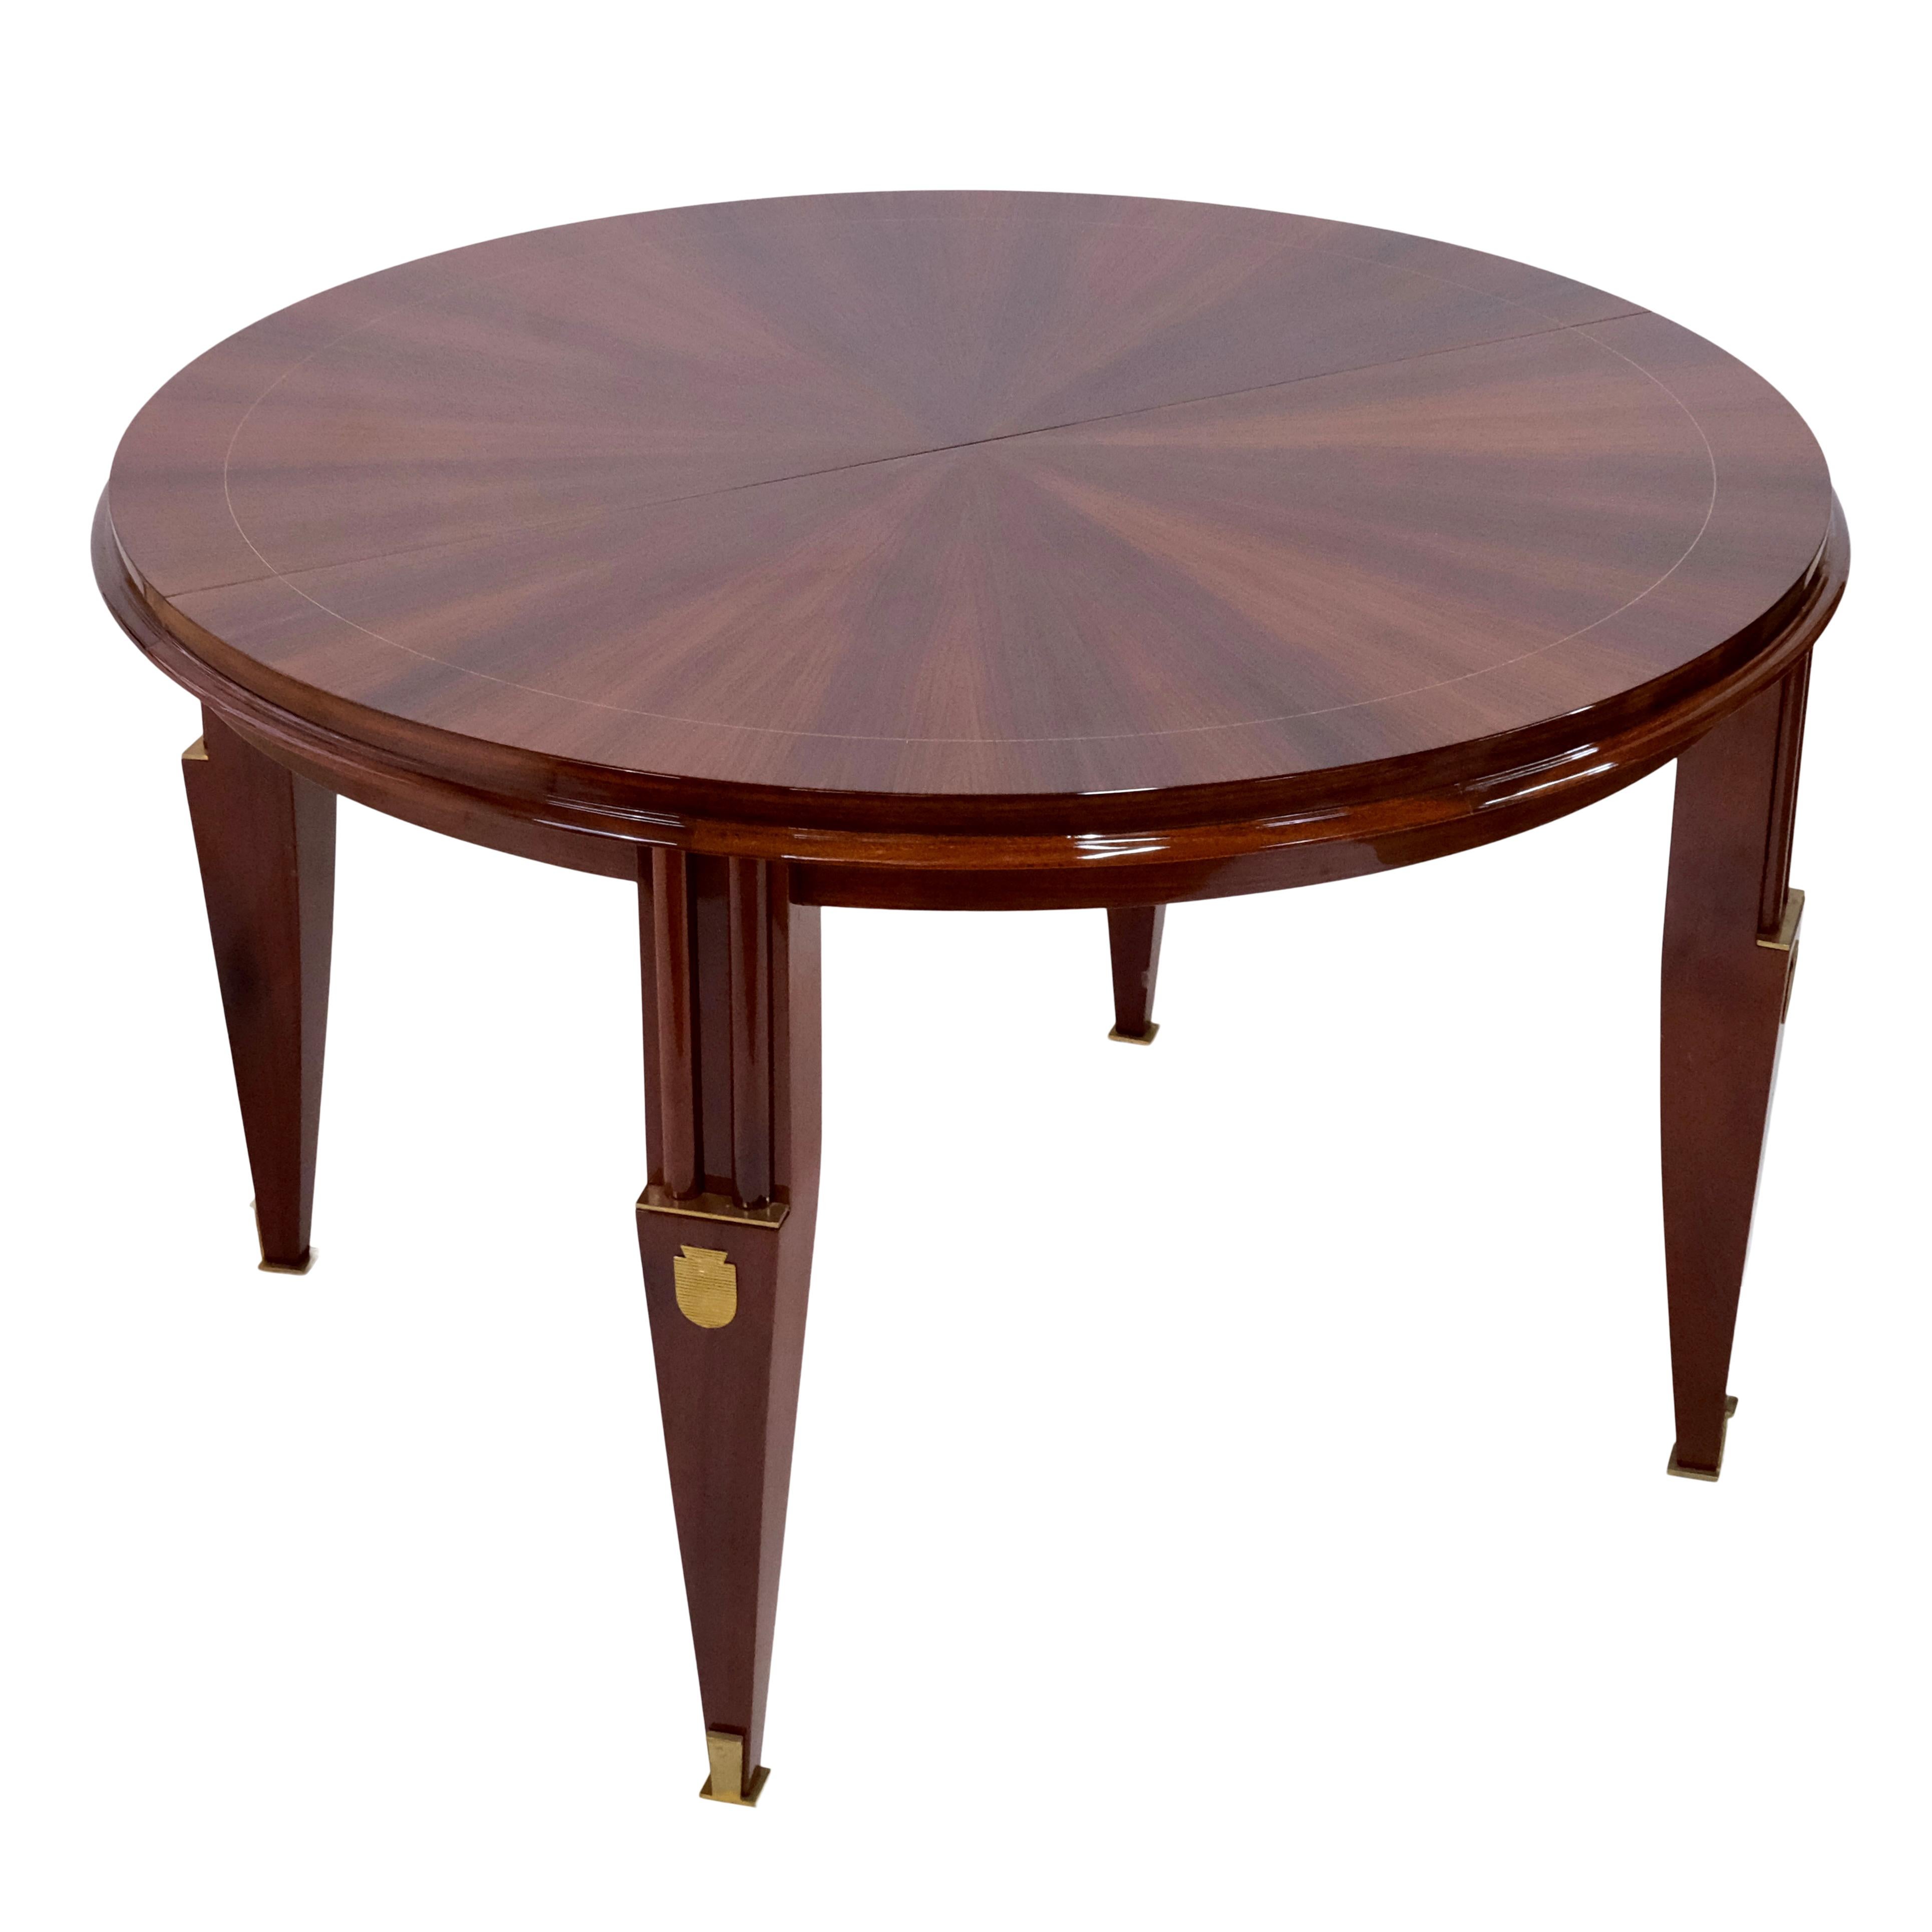 Round dining table with extension (2x 40cm) 
Mahogany, shellac hand polished 
Brass fittings

Original Art Deco, France 1930s

The table can also be used as a nice center table at your entrance. 

Dimensions:
Diameter: 124 cm 
Height: 76